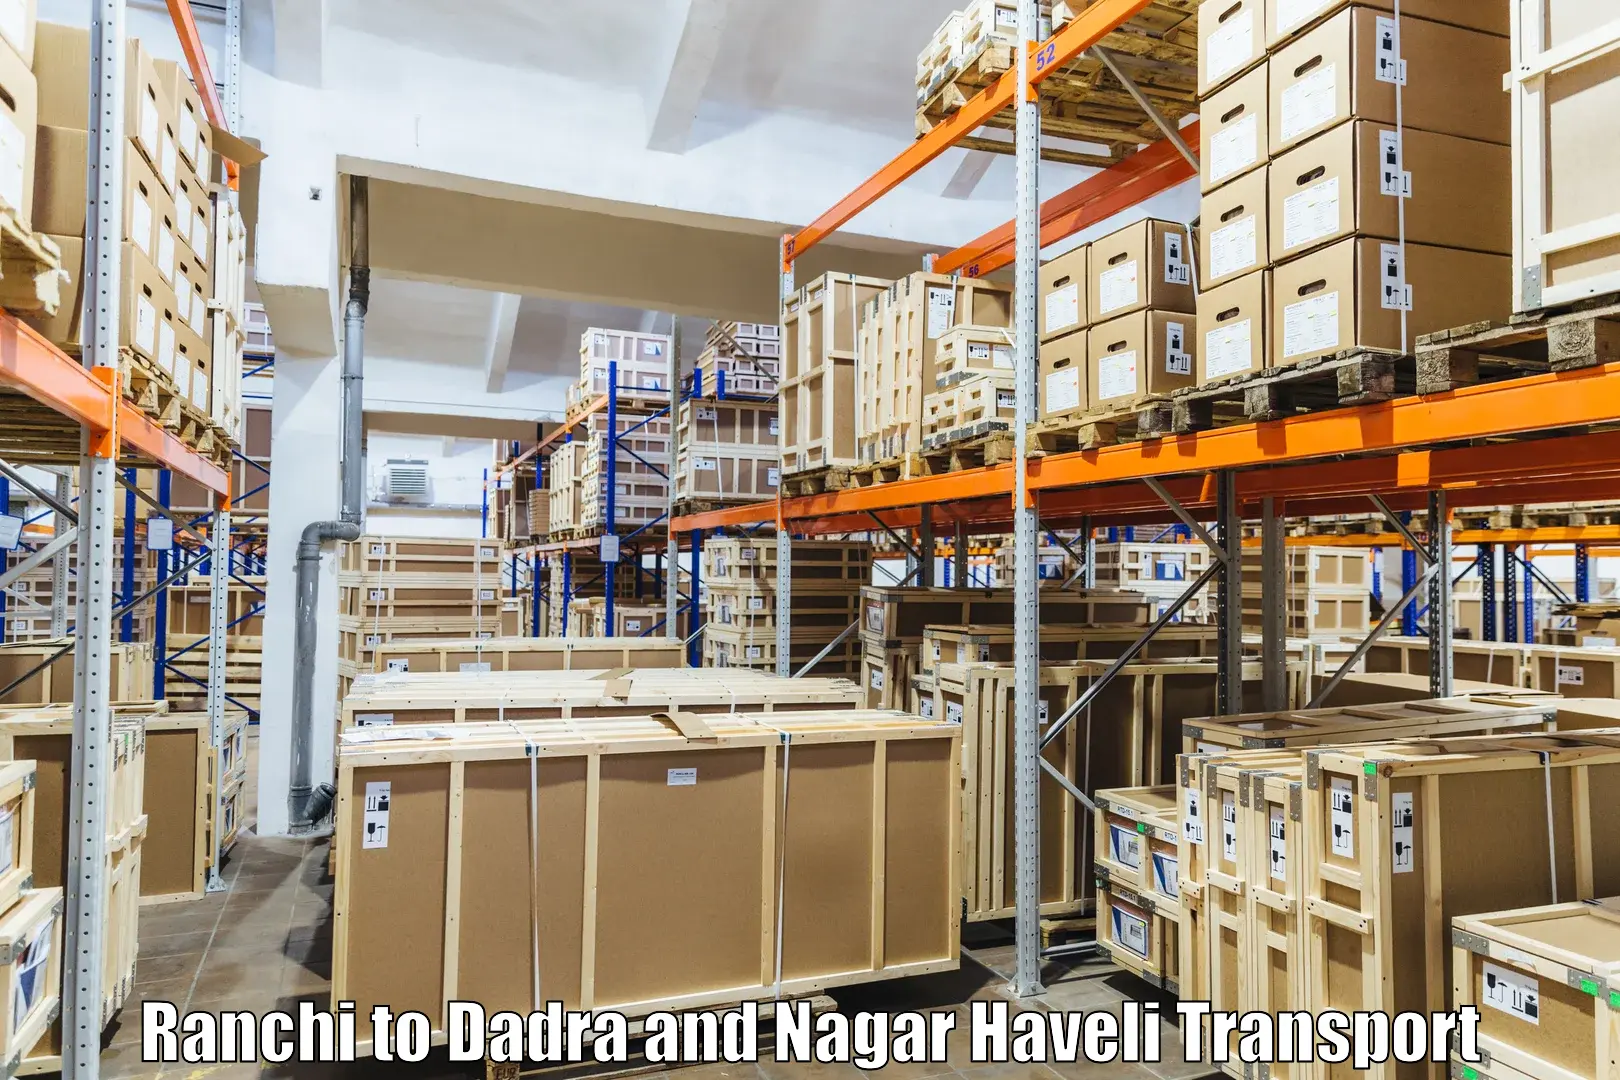 Truck transport companies in India Ranchi to Dadra and Nagar Haveli